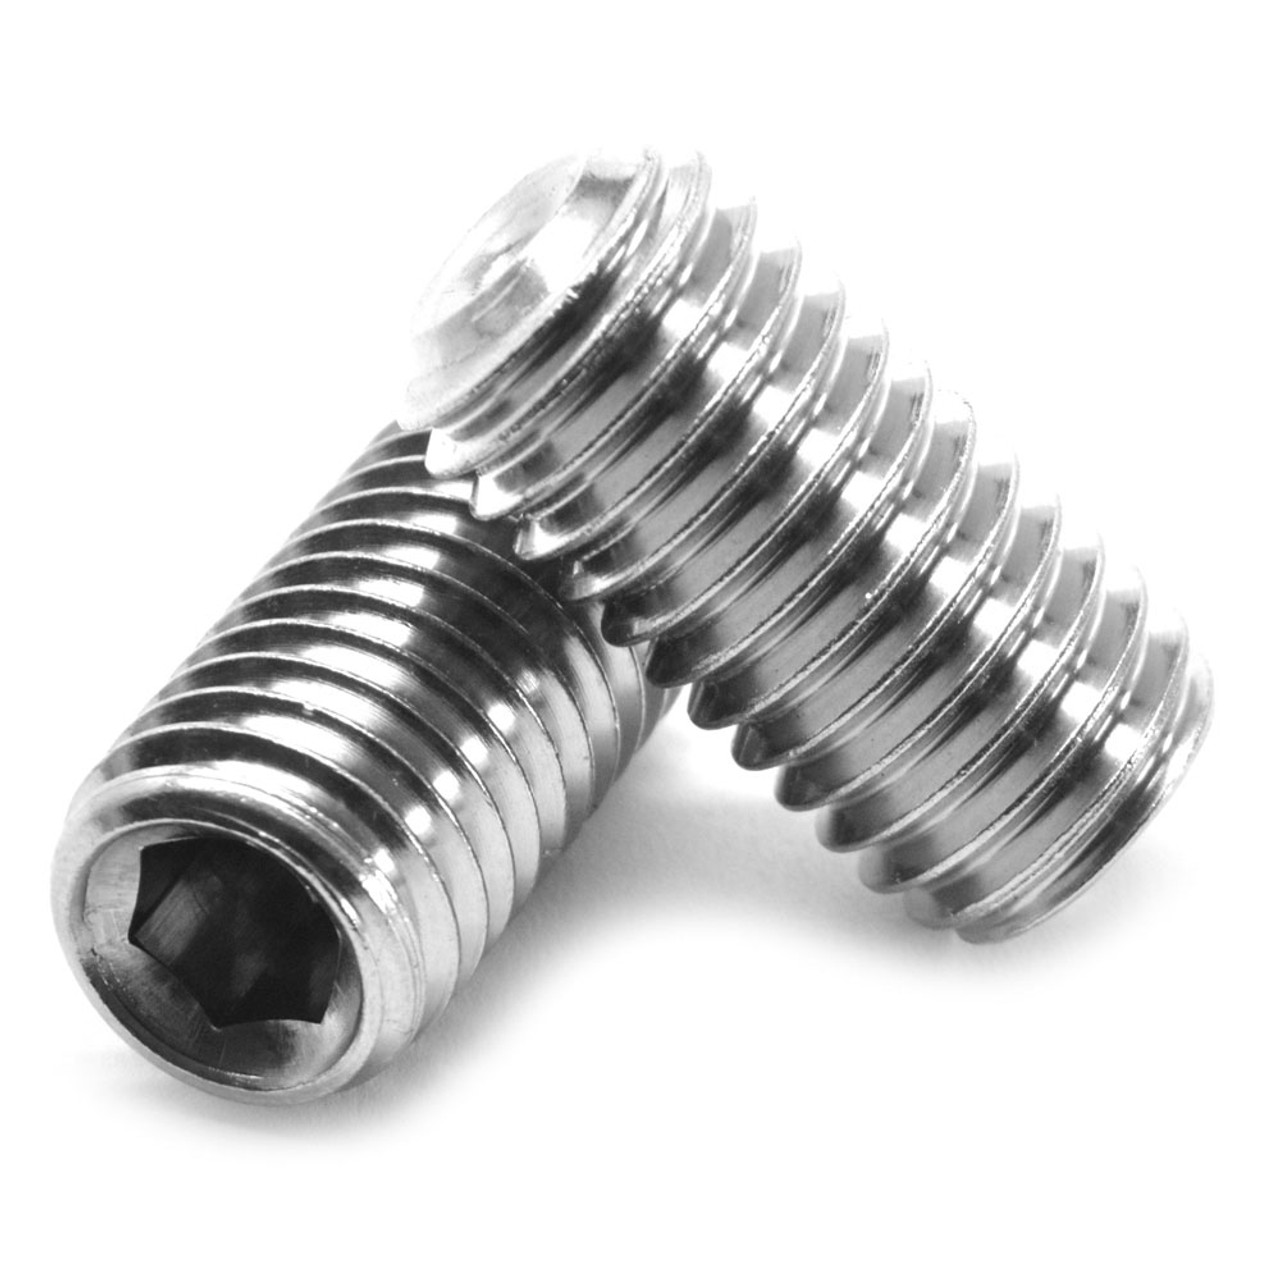 M20 x 2.50 x 70 MM Coarse Thread DIN 916 / ISO 4029 Socket Set Screw Cup Point Stainless Steel 18-8